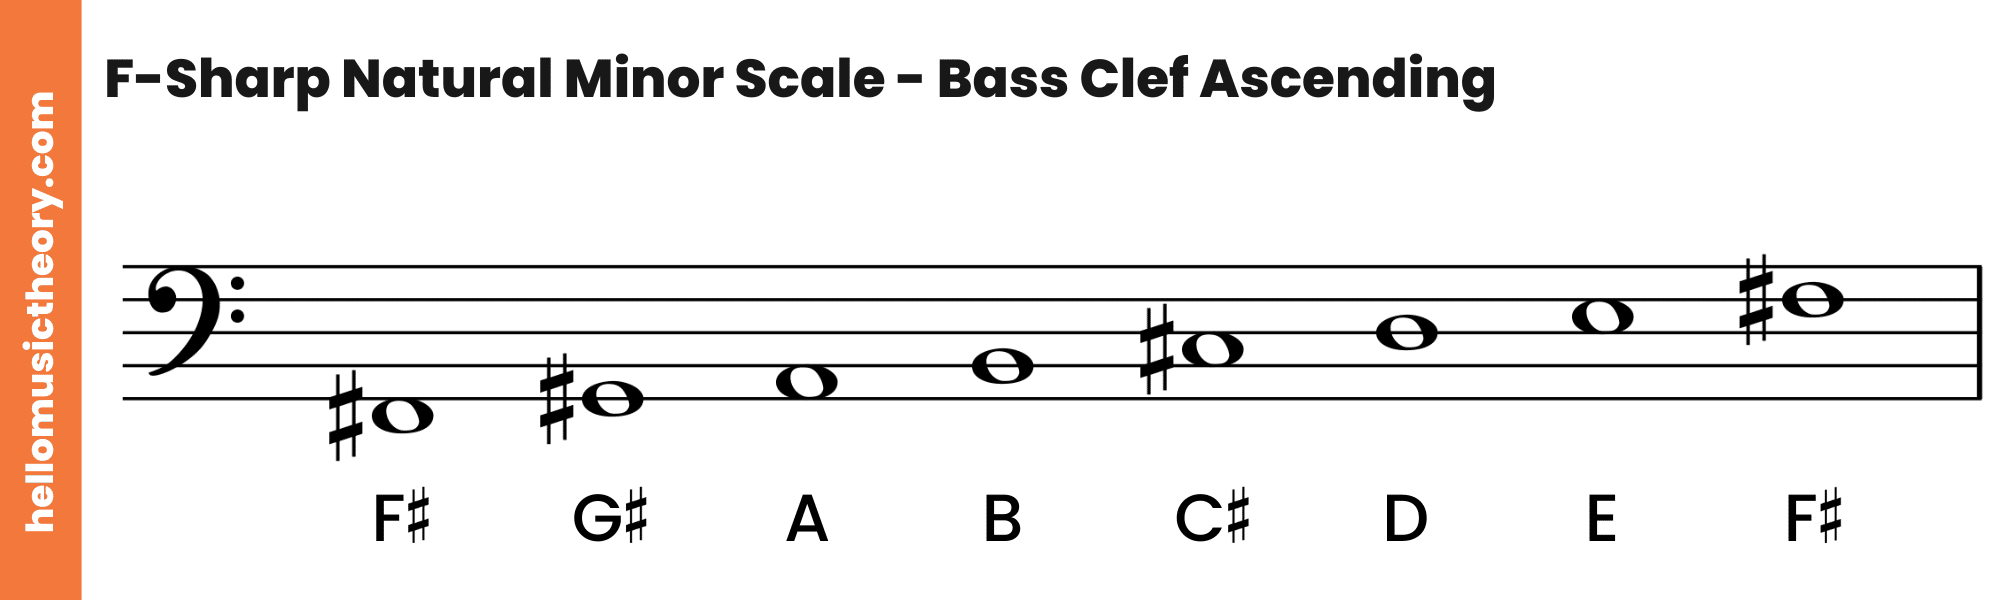 F-Sharp Natural Minor Scale Bass Clef Ascending